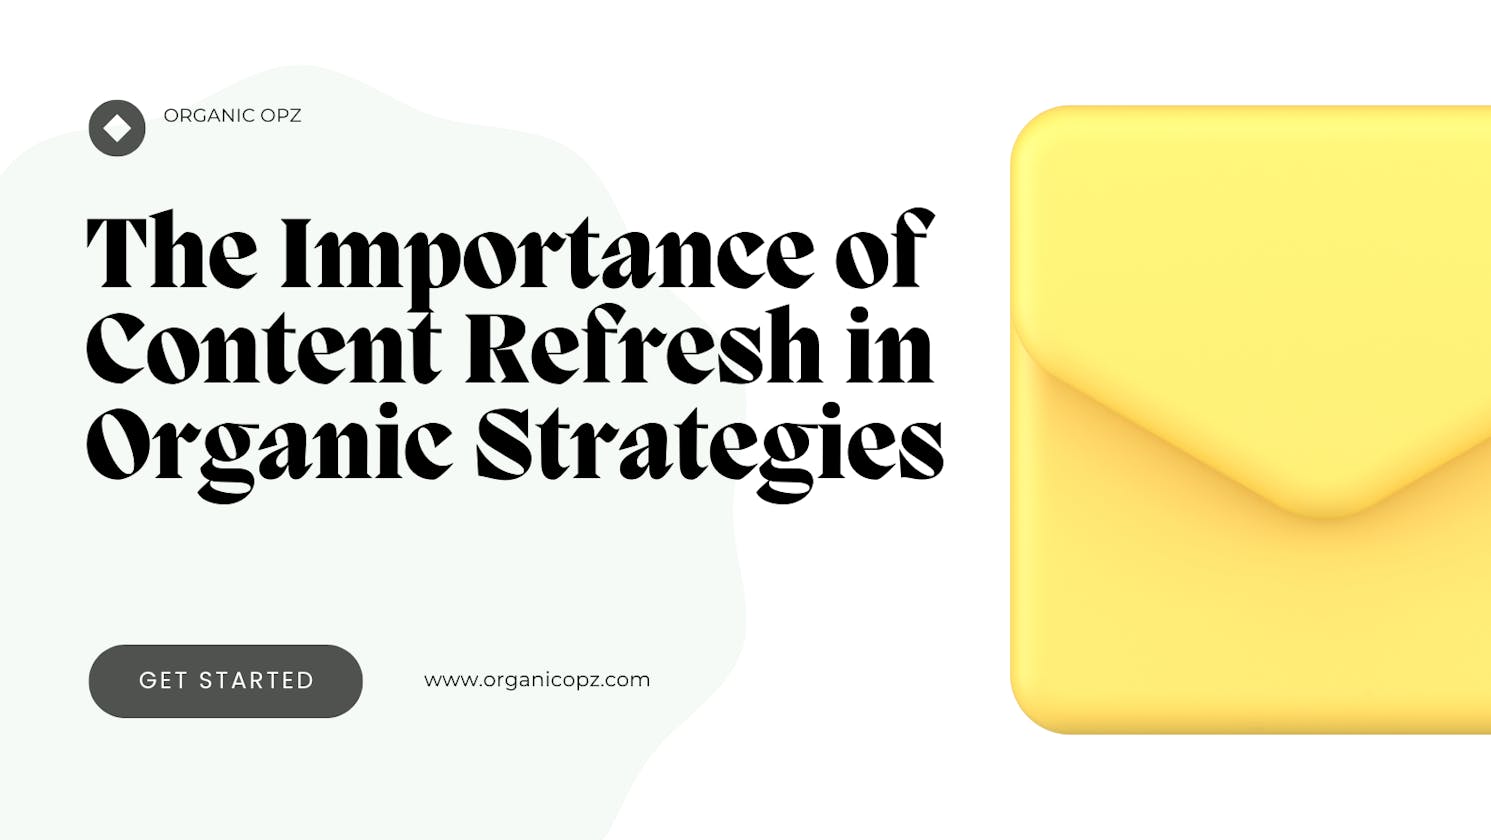 The Importance of Content Refresh in Organic Strategies